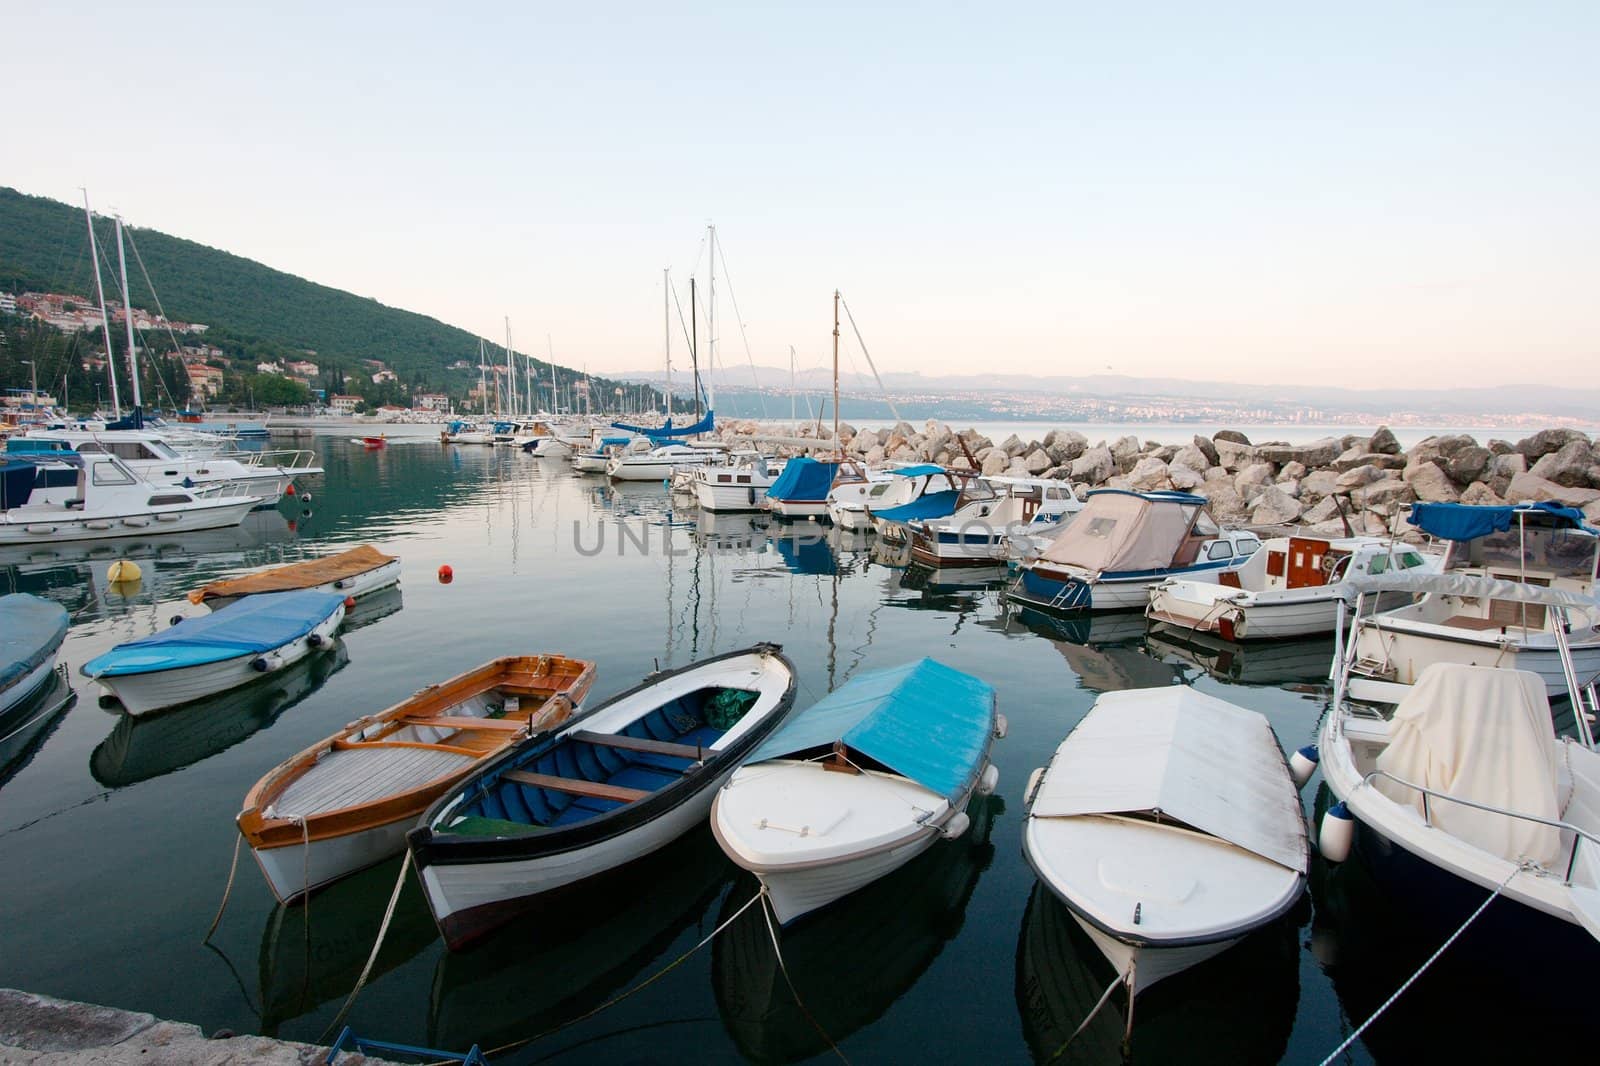 Boats in the harbor of a mediterranean village